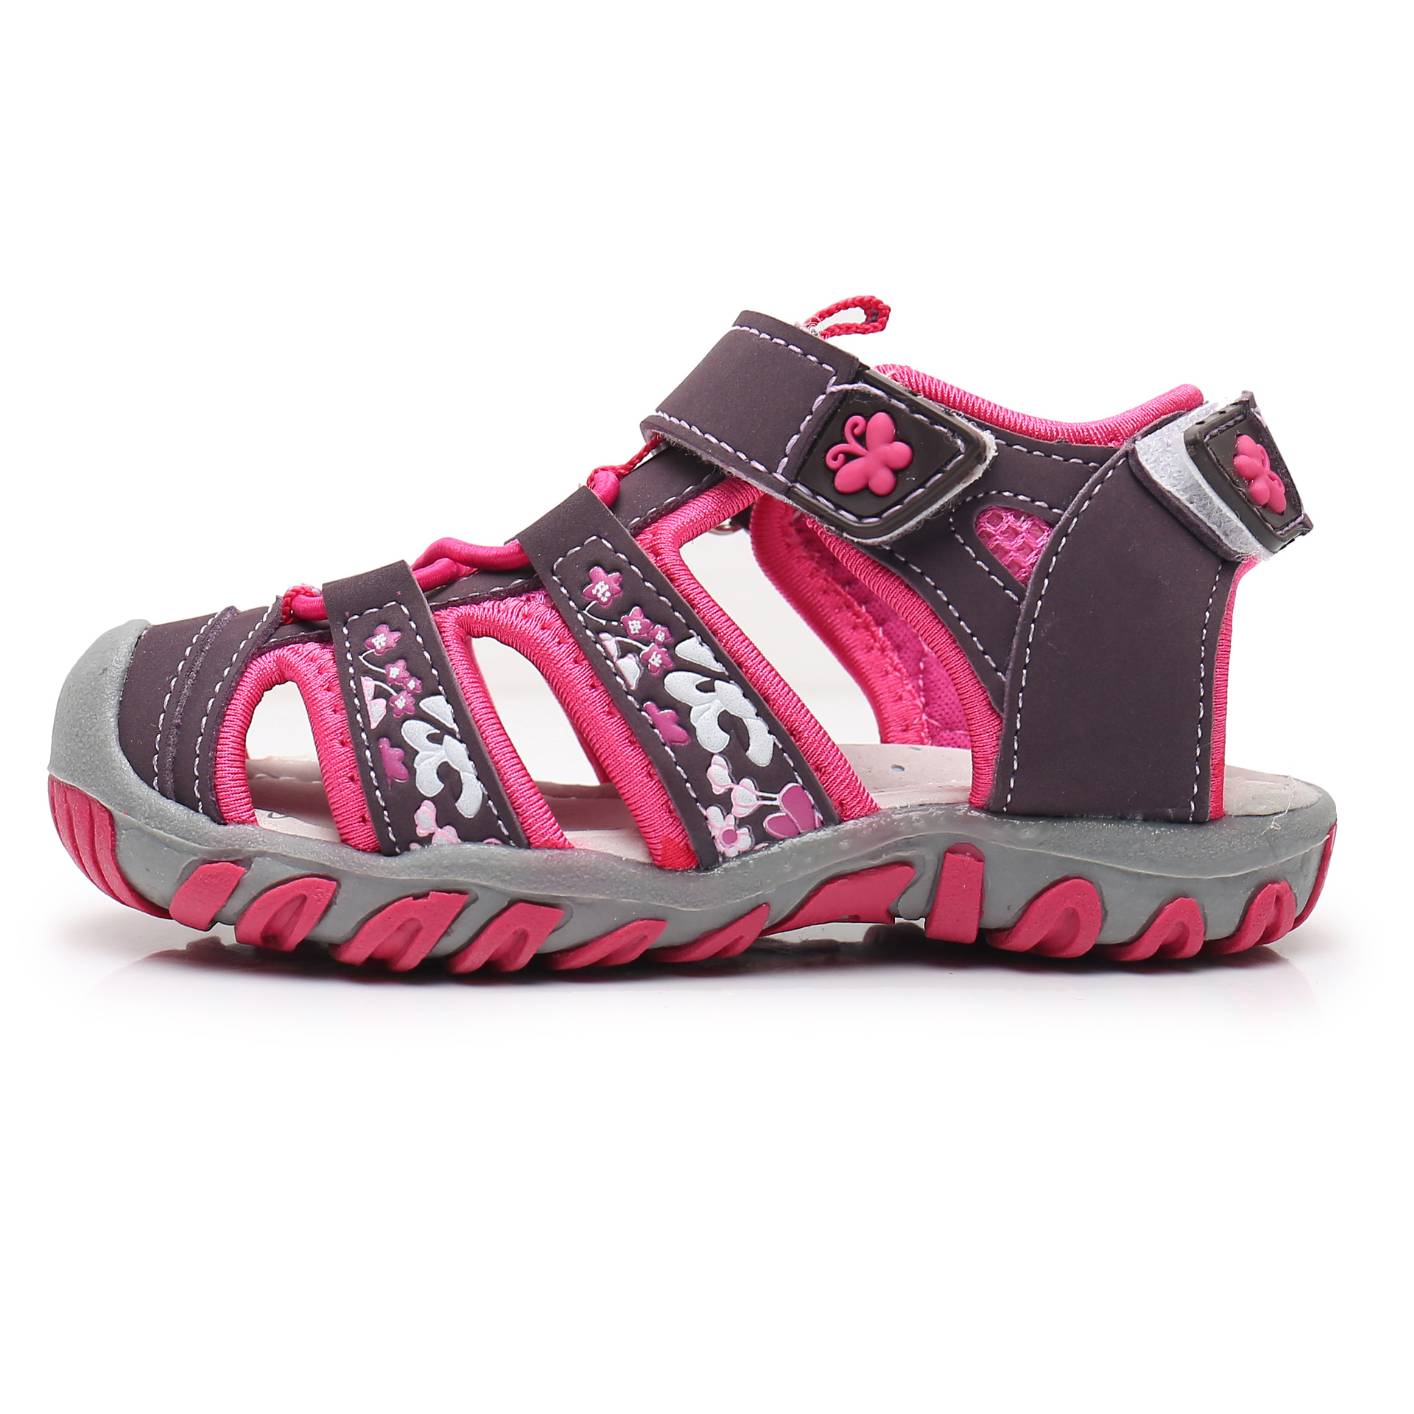 Y607 girls outdoor sports sandals Girls Velcro summer casual sandals Lace-up sandals for children
